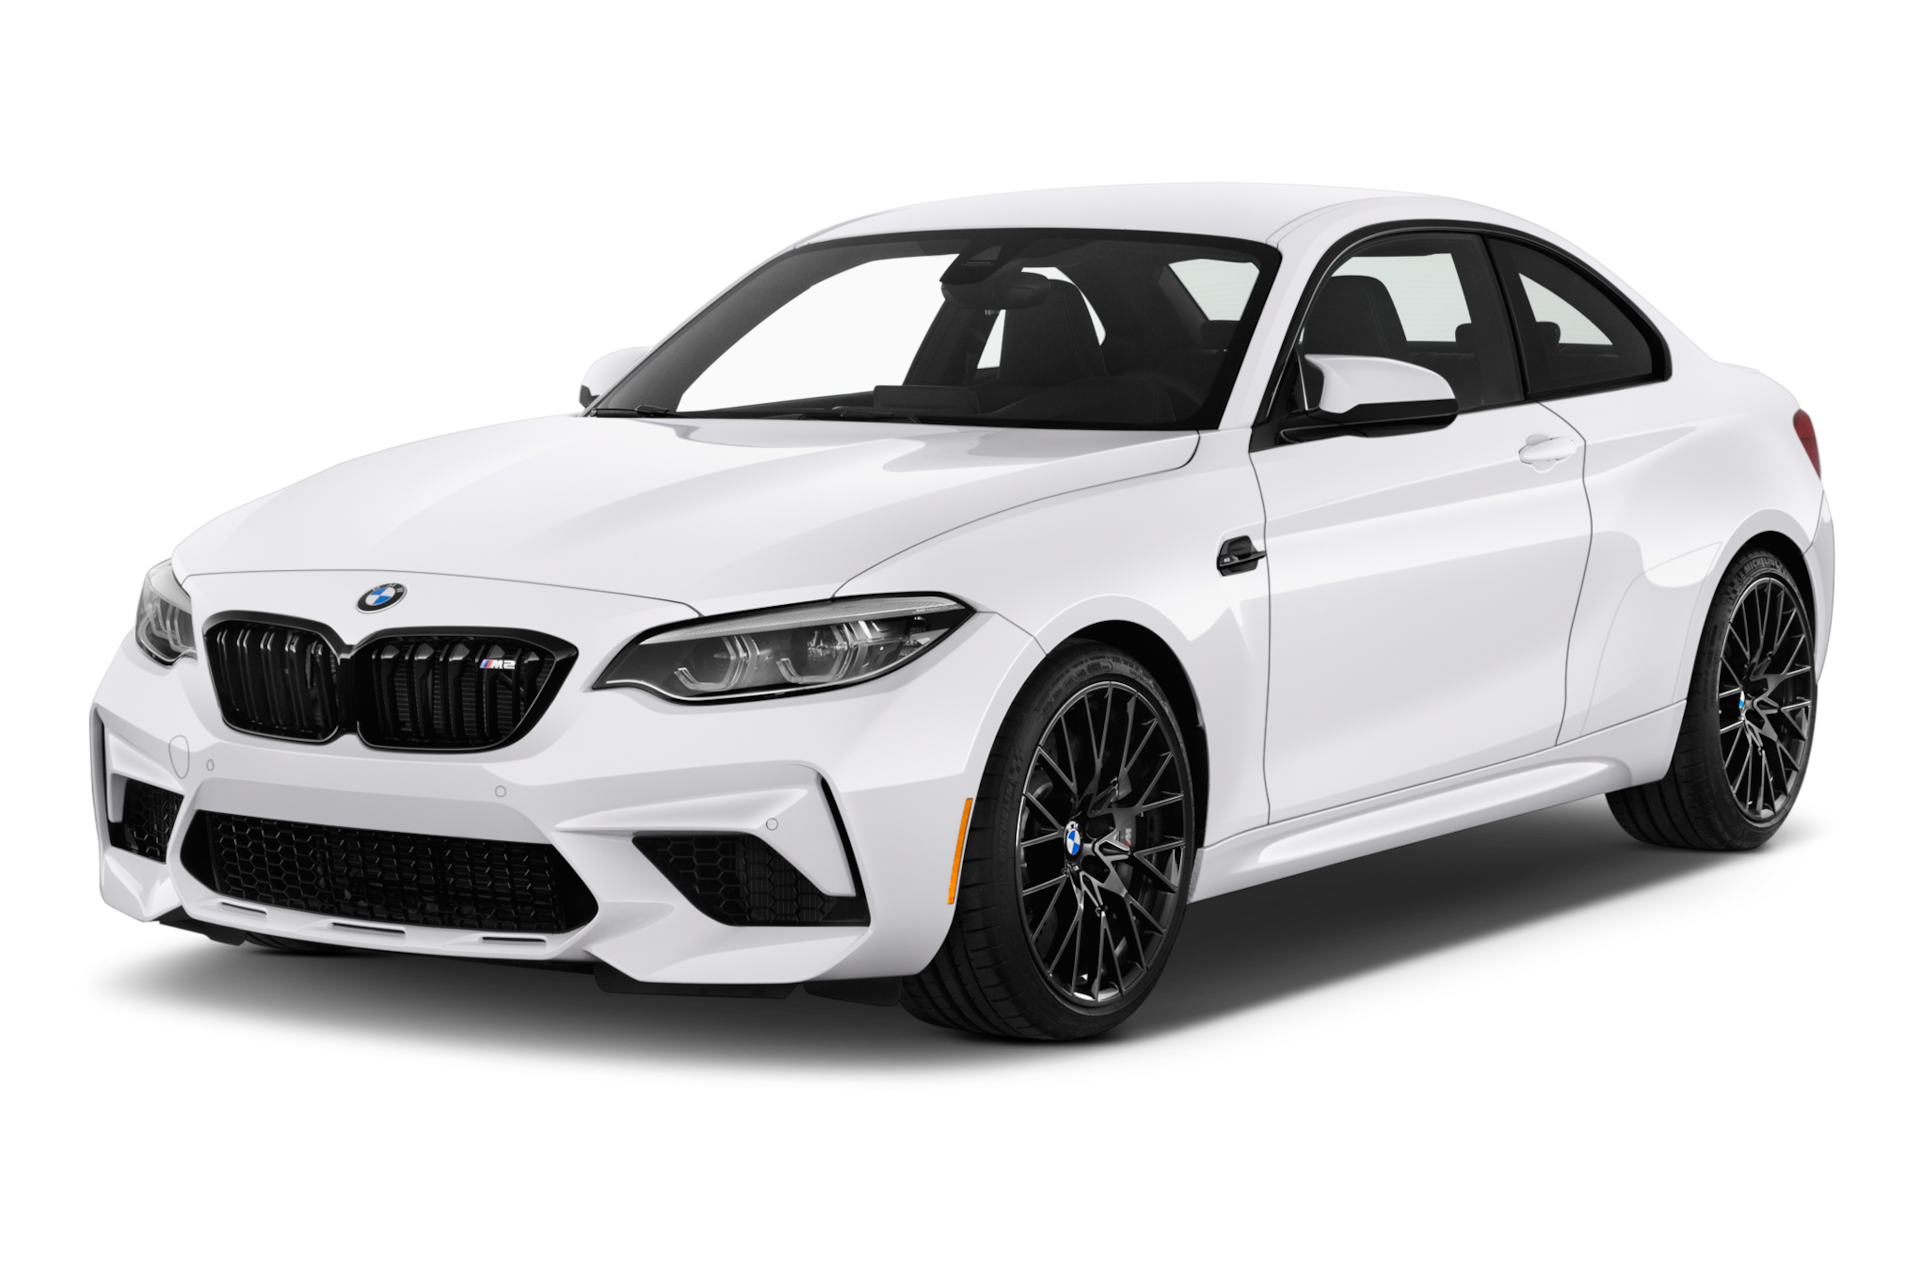 2018 BMW M2 Prices, Reviews, and Photos - MotorTrend